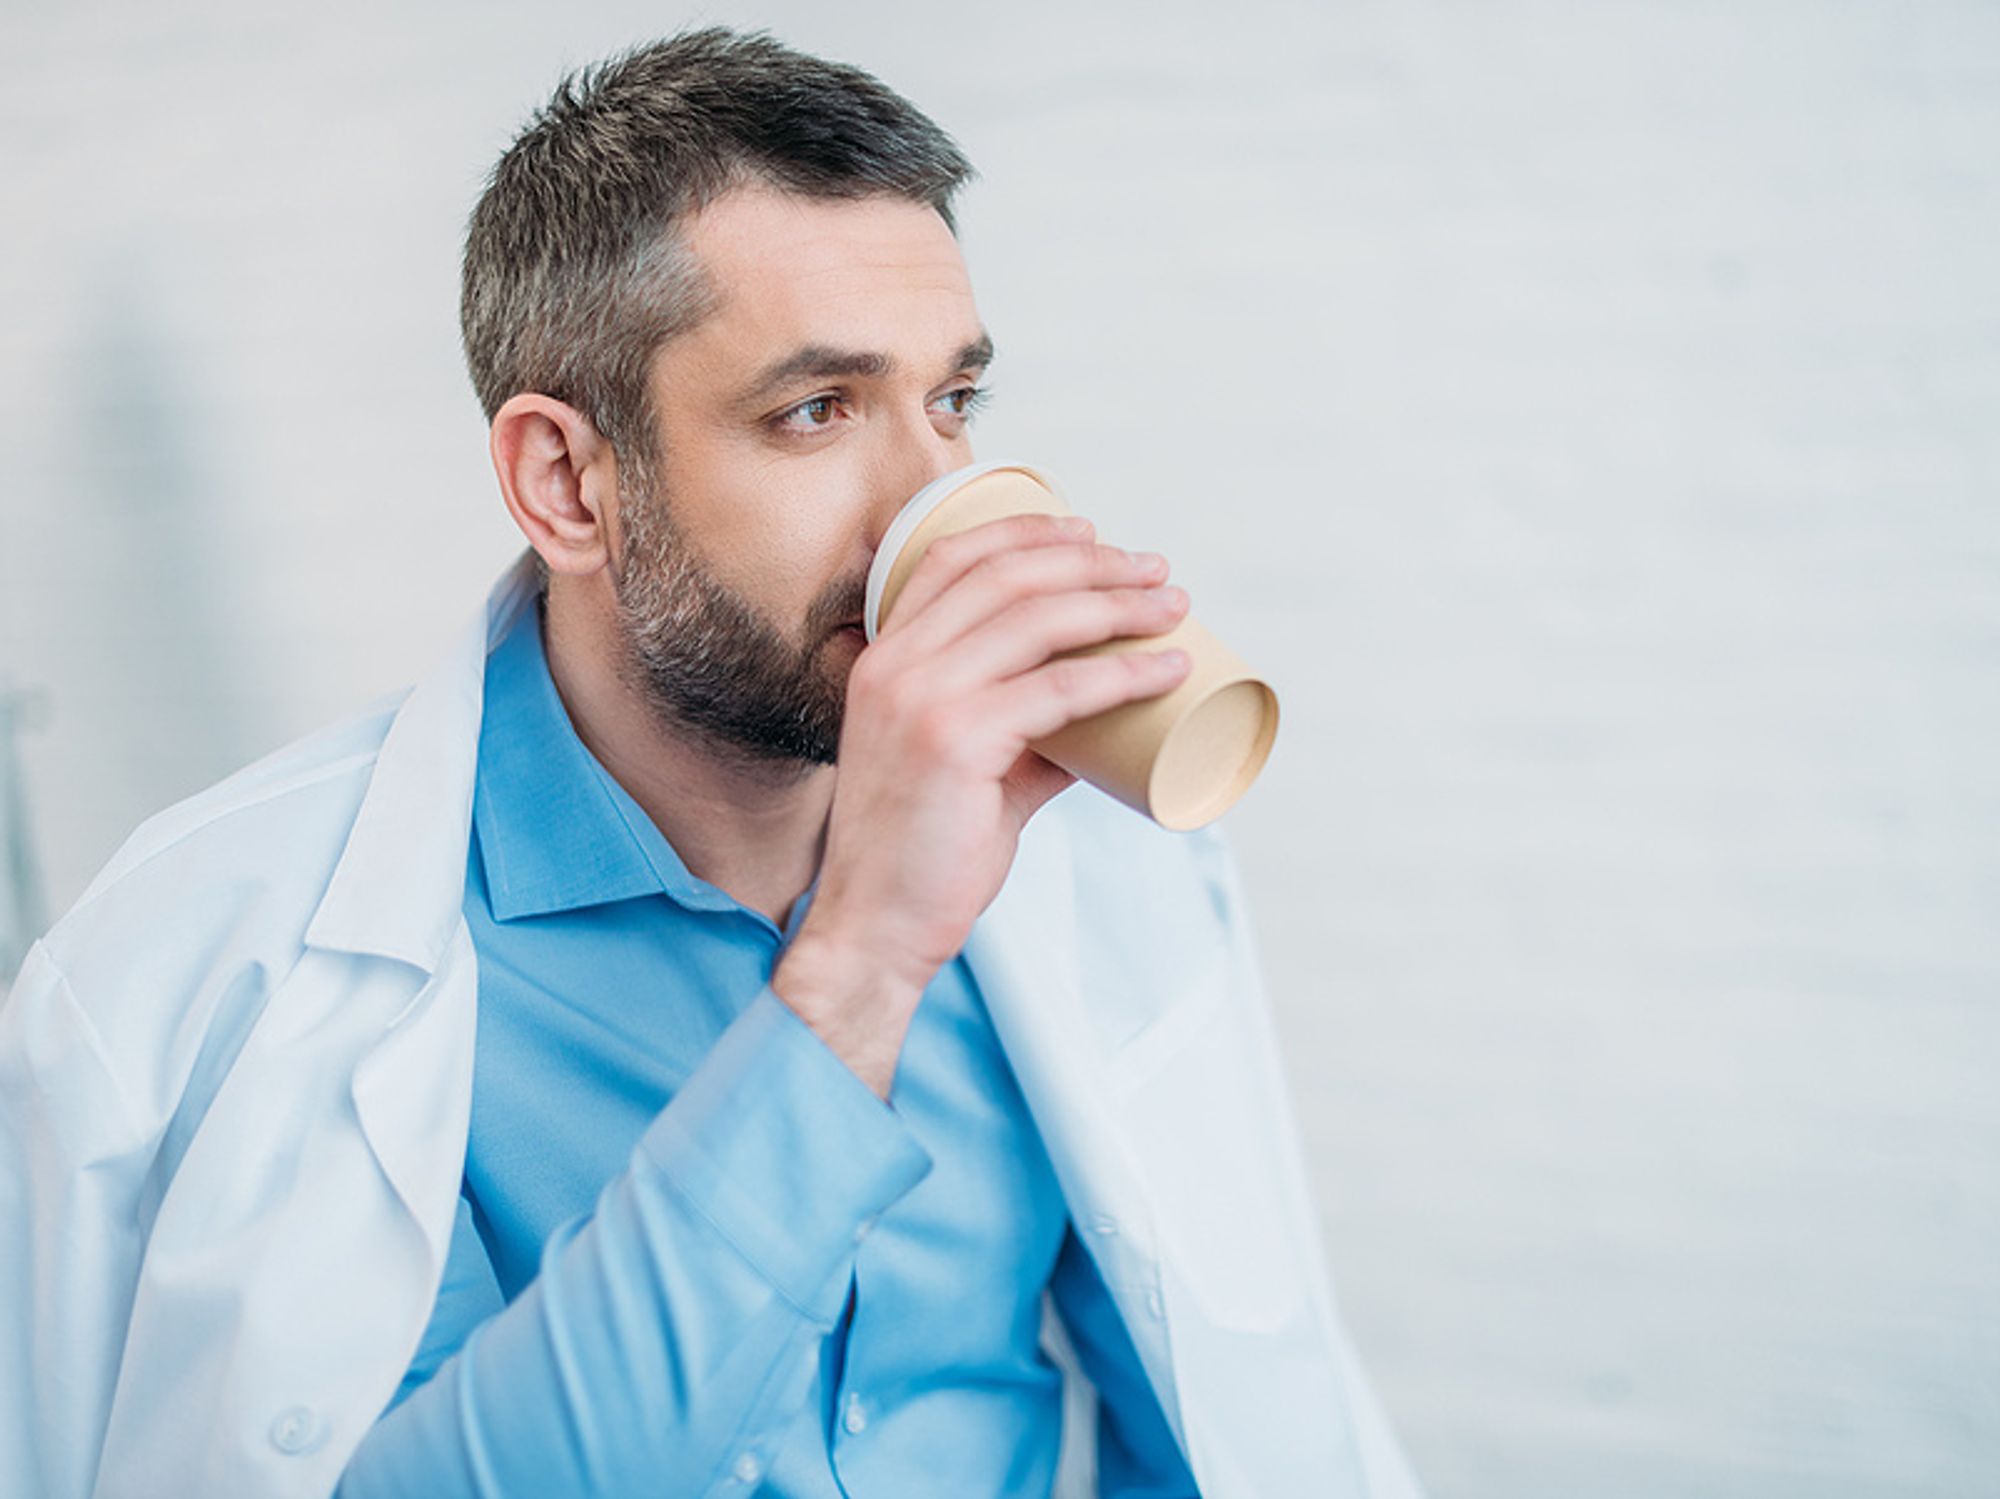 A tired doctor enjoys a cup of coffee.